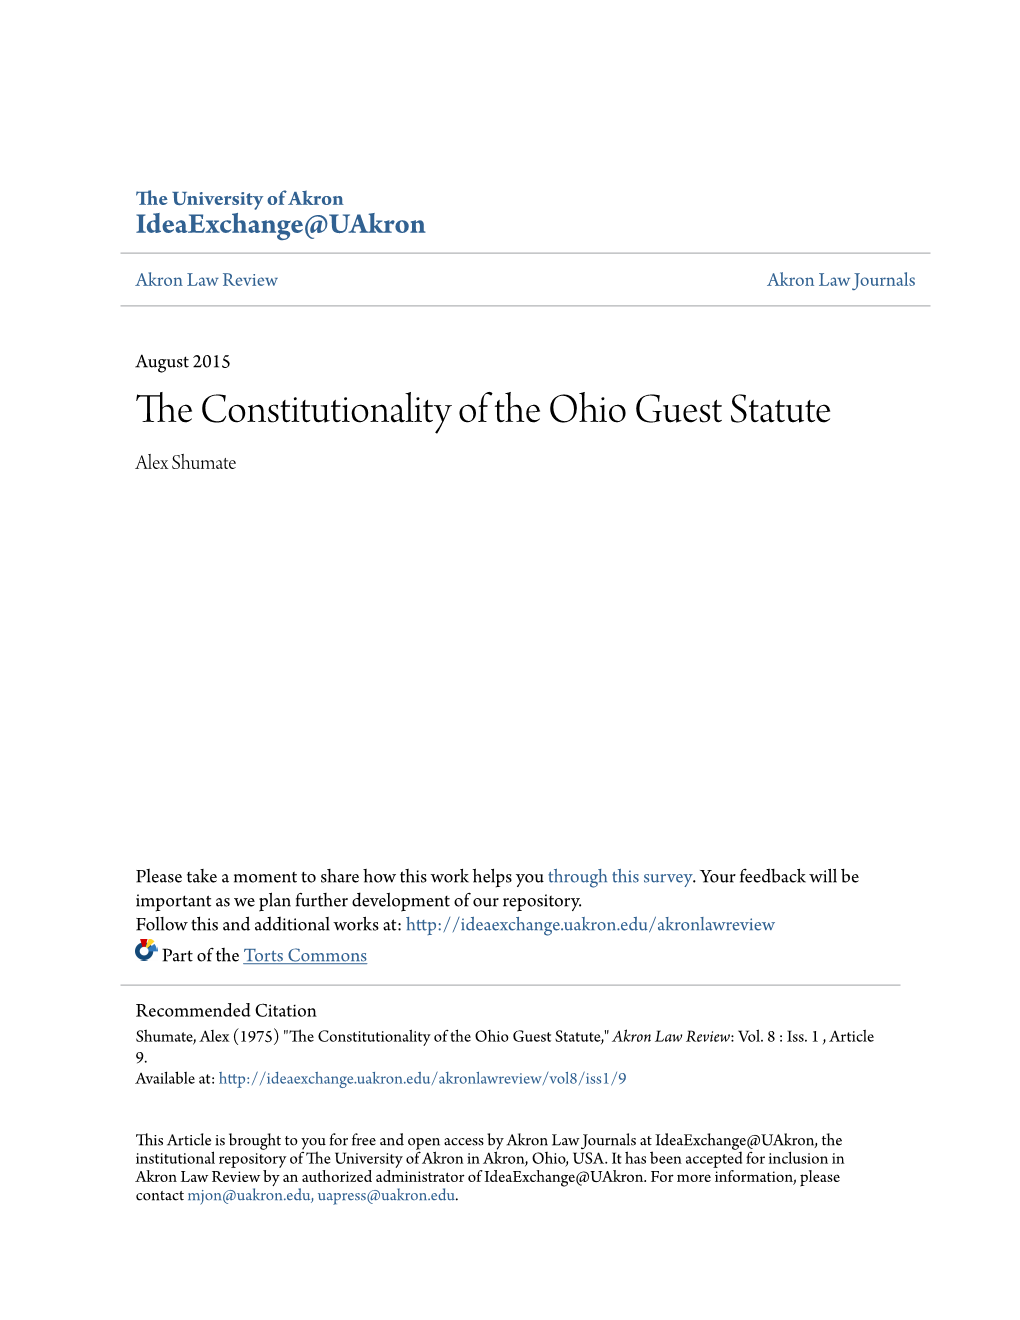 The Constitutionality of the Ohio Guest Statute